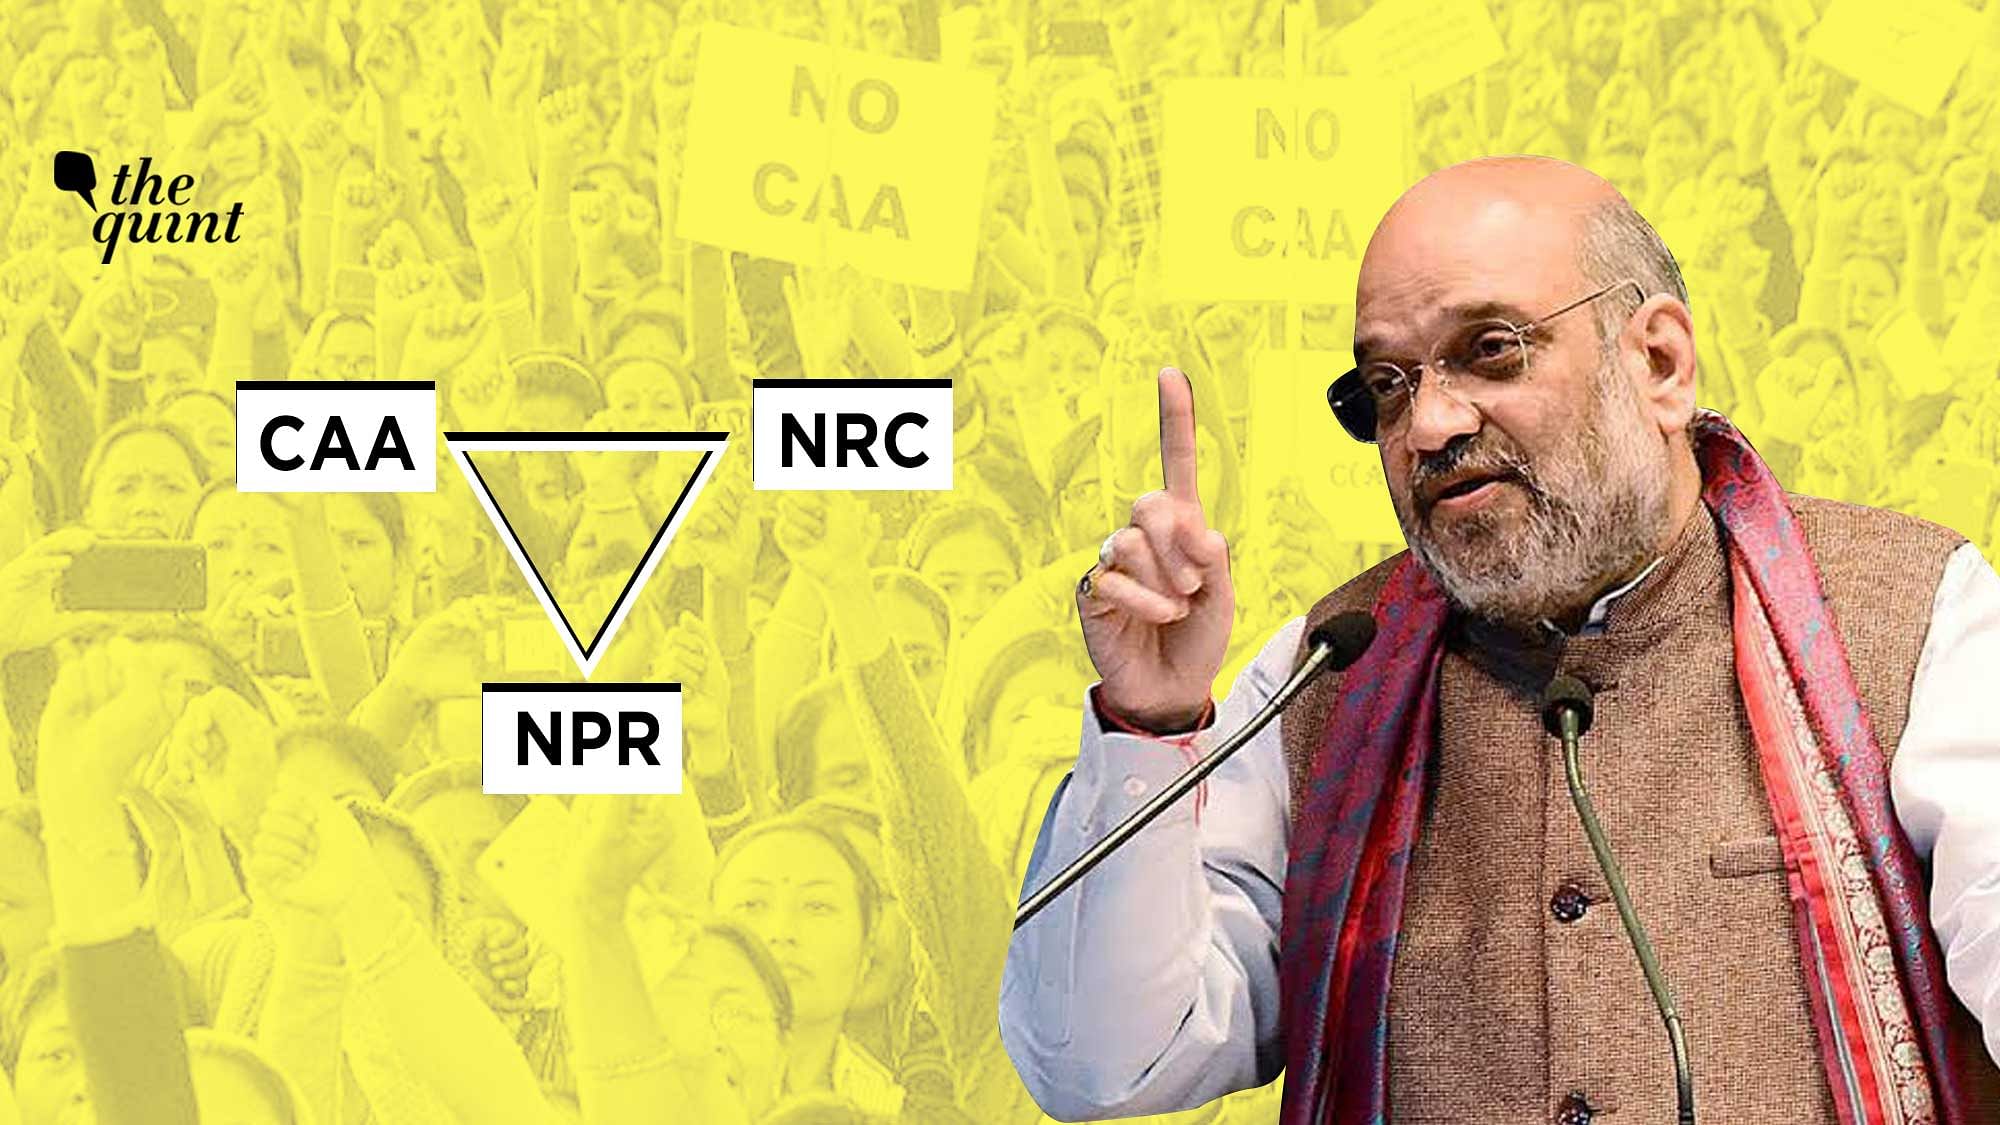 Union Home Minister Amit Shah has asserted that there is no link between NPR and NRC.